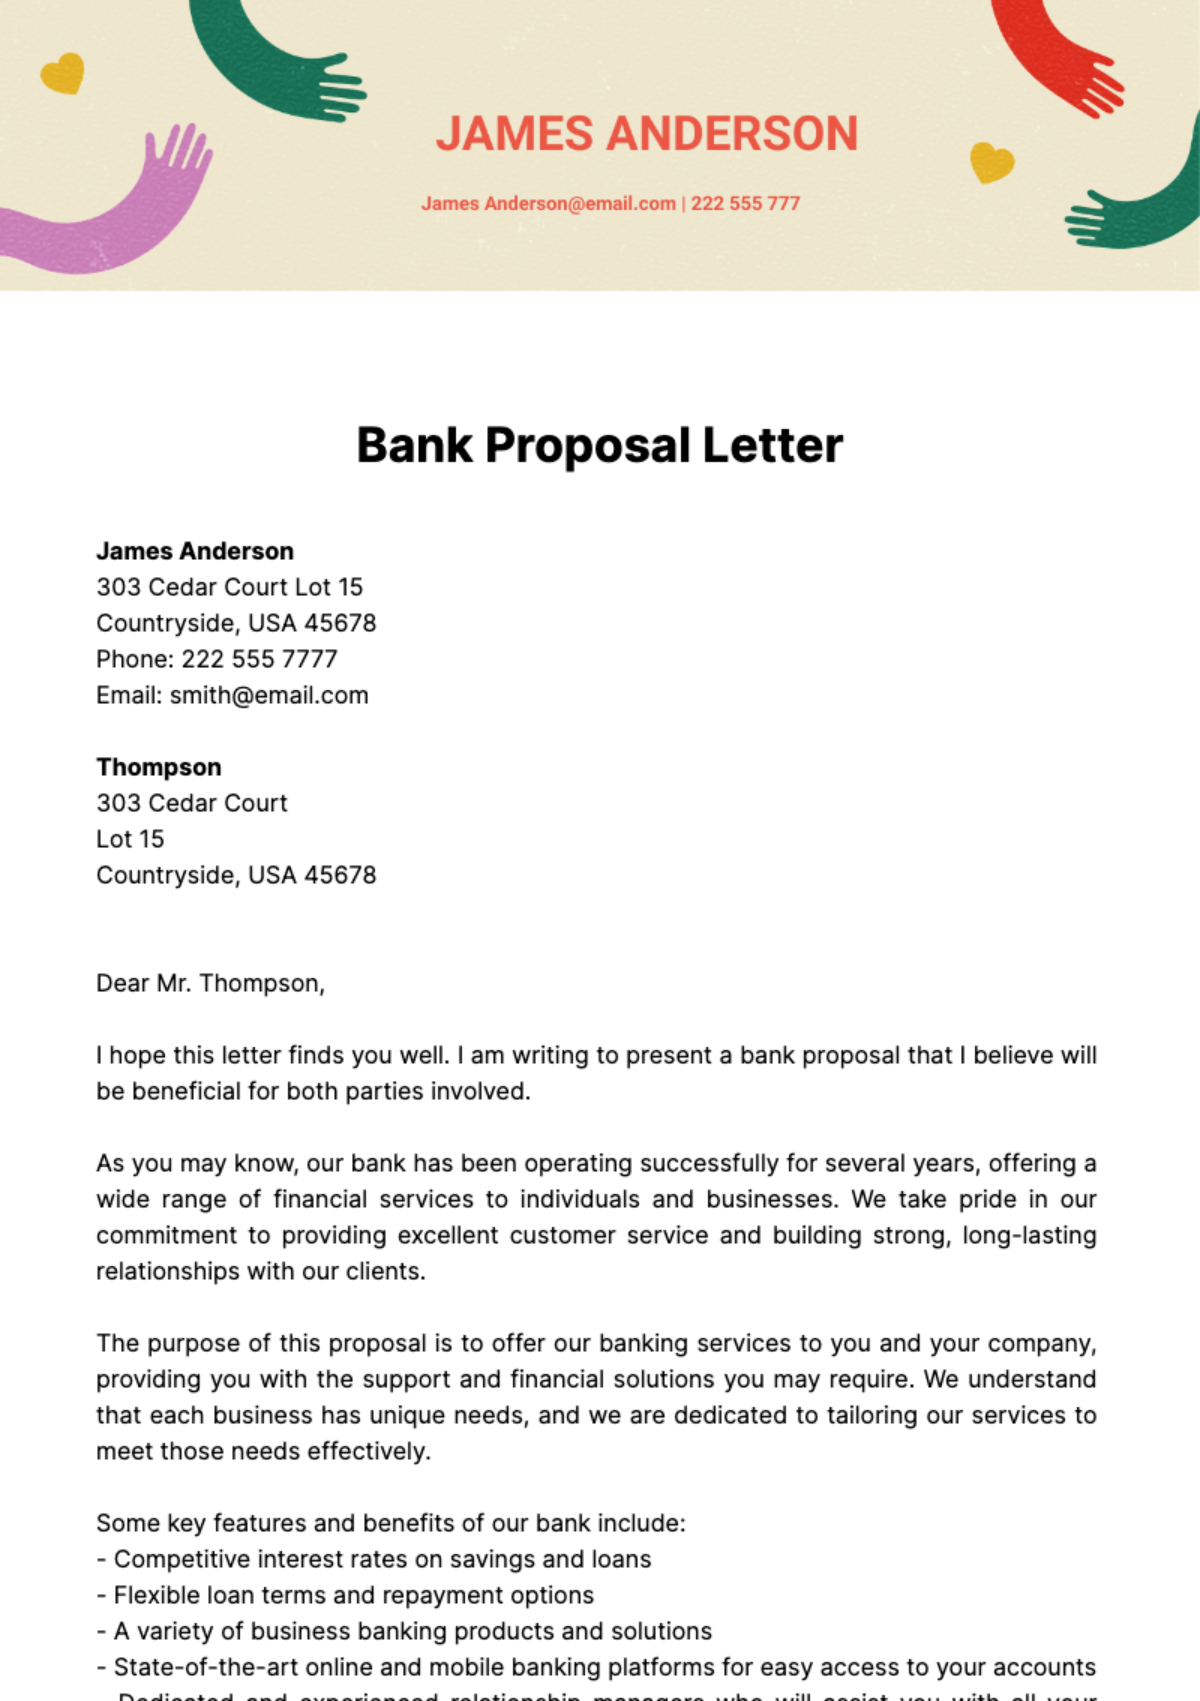 Bank Proposal Letter Template